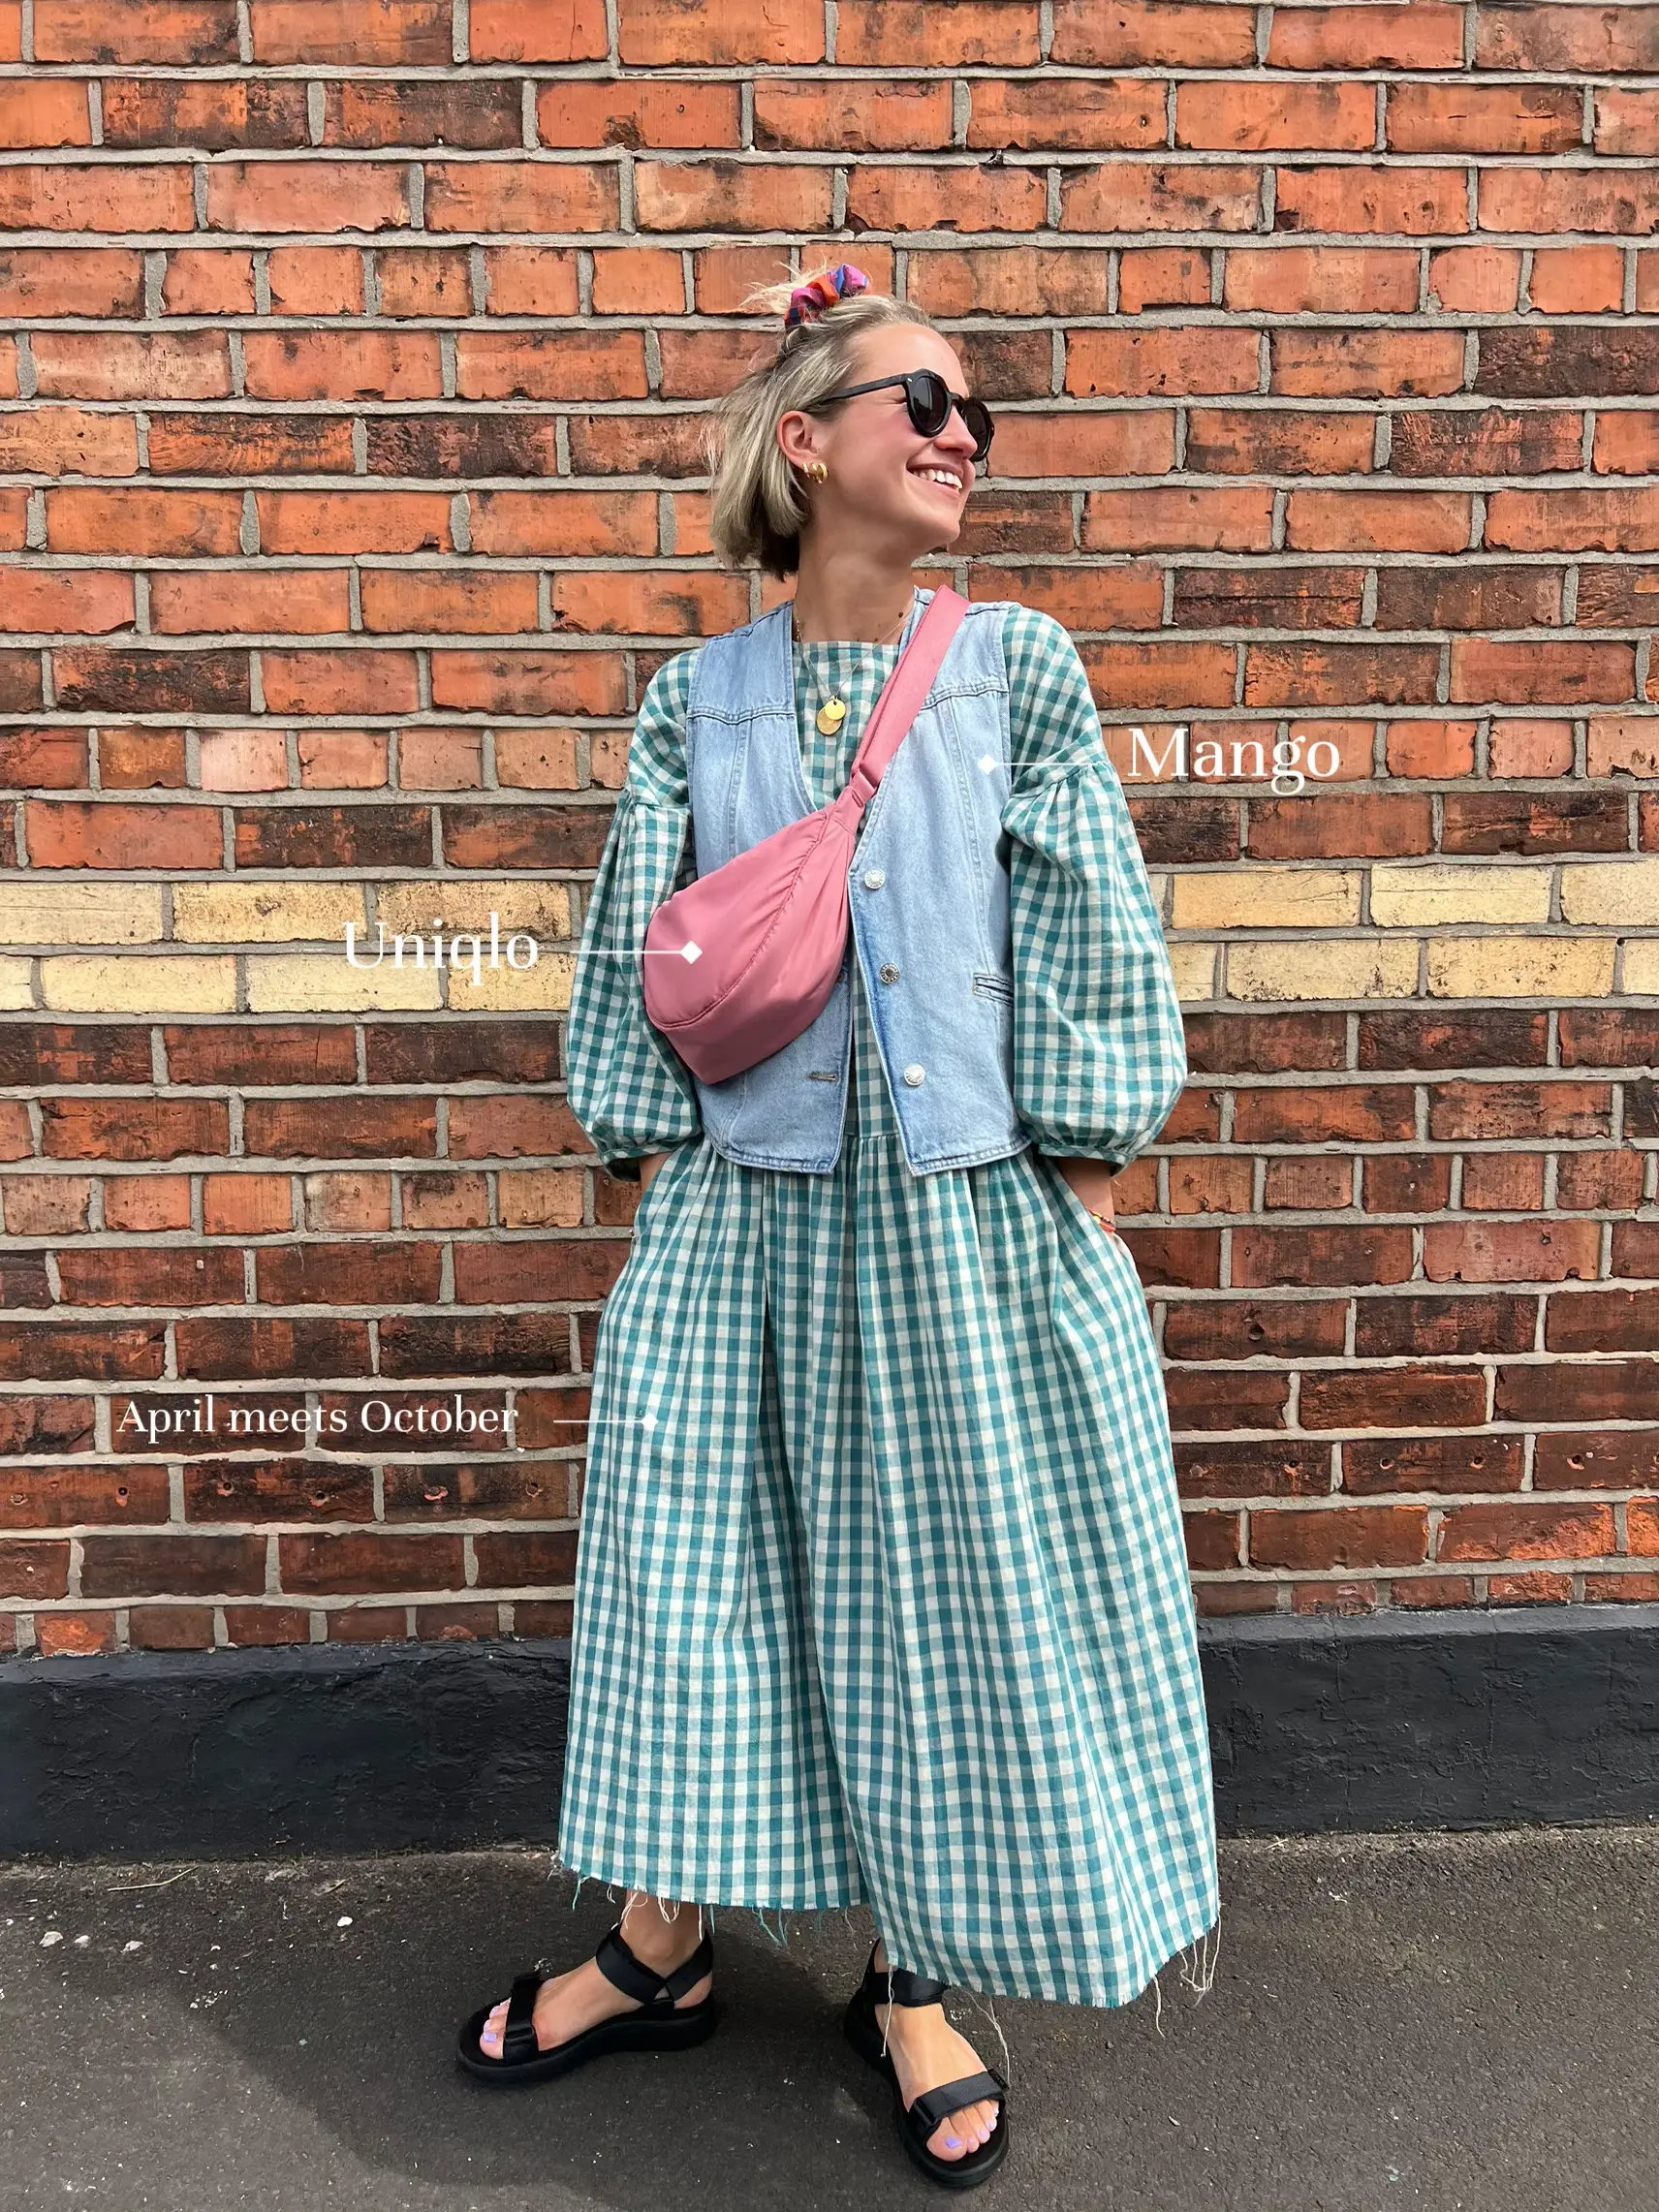 9 to 5 style - How to Wear Gingham to the Office - Savvy Southern Chic